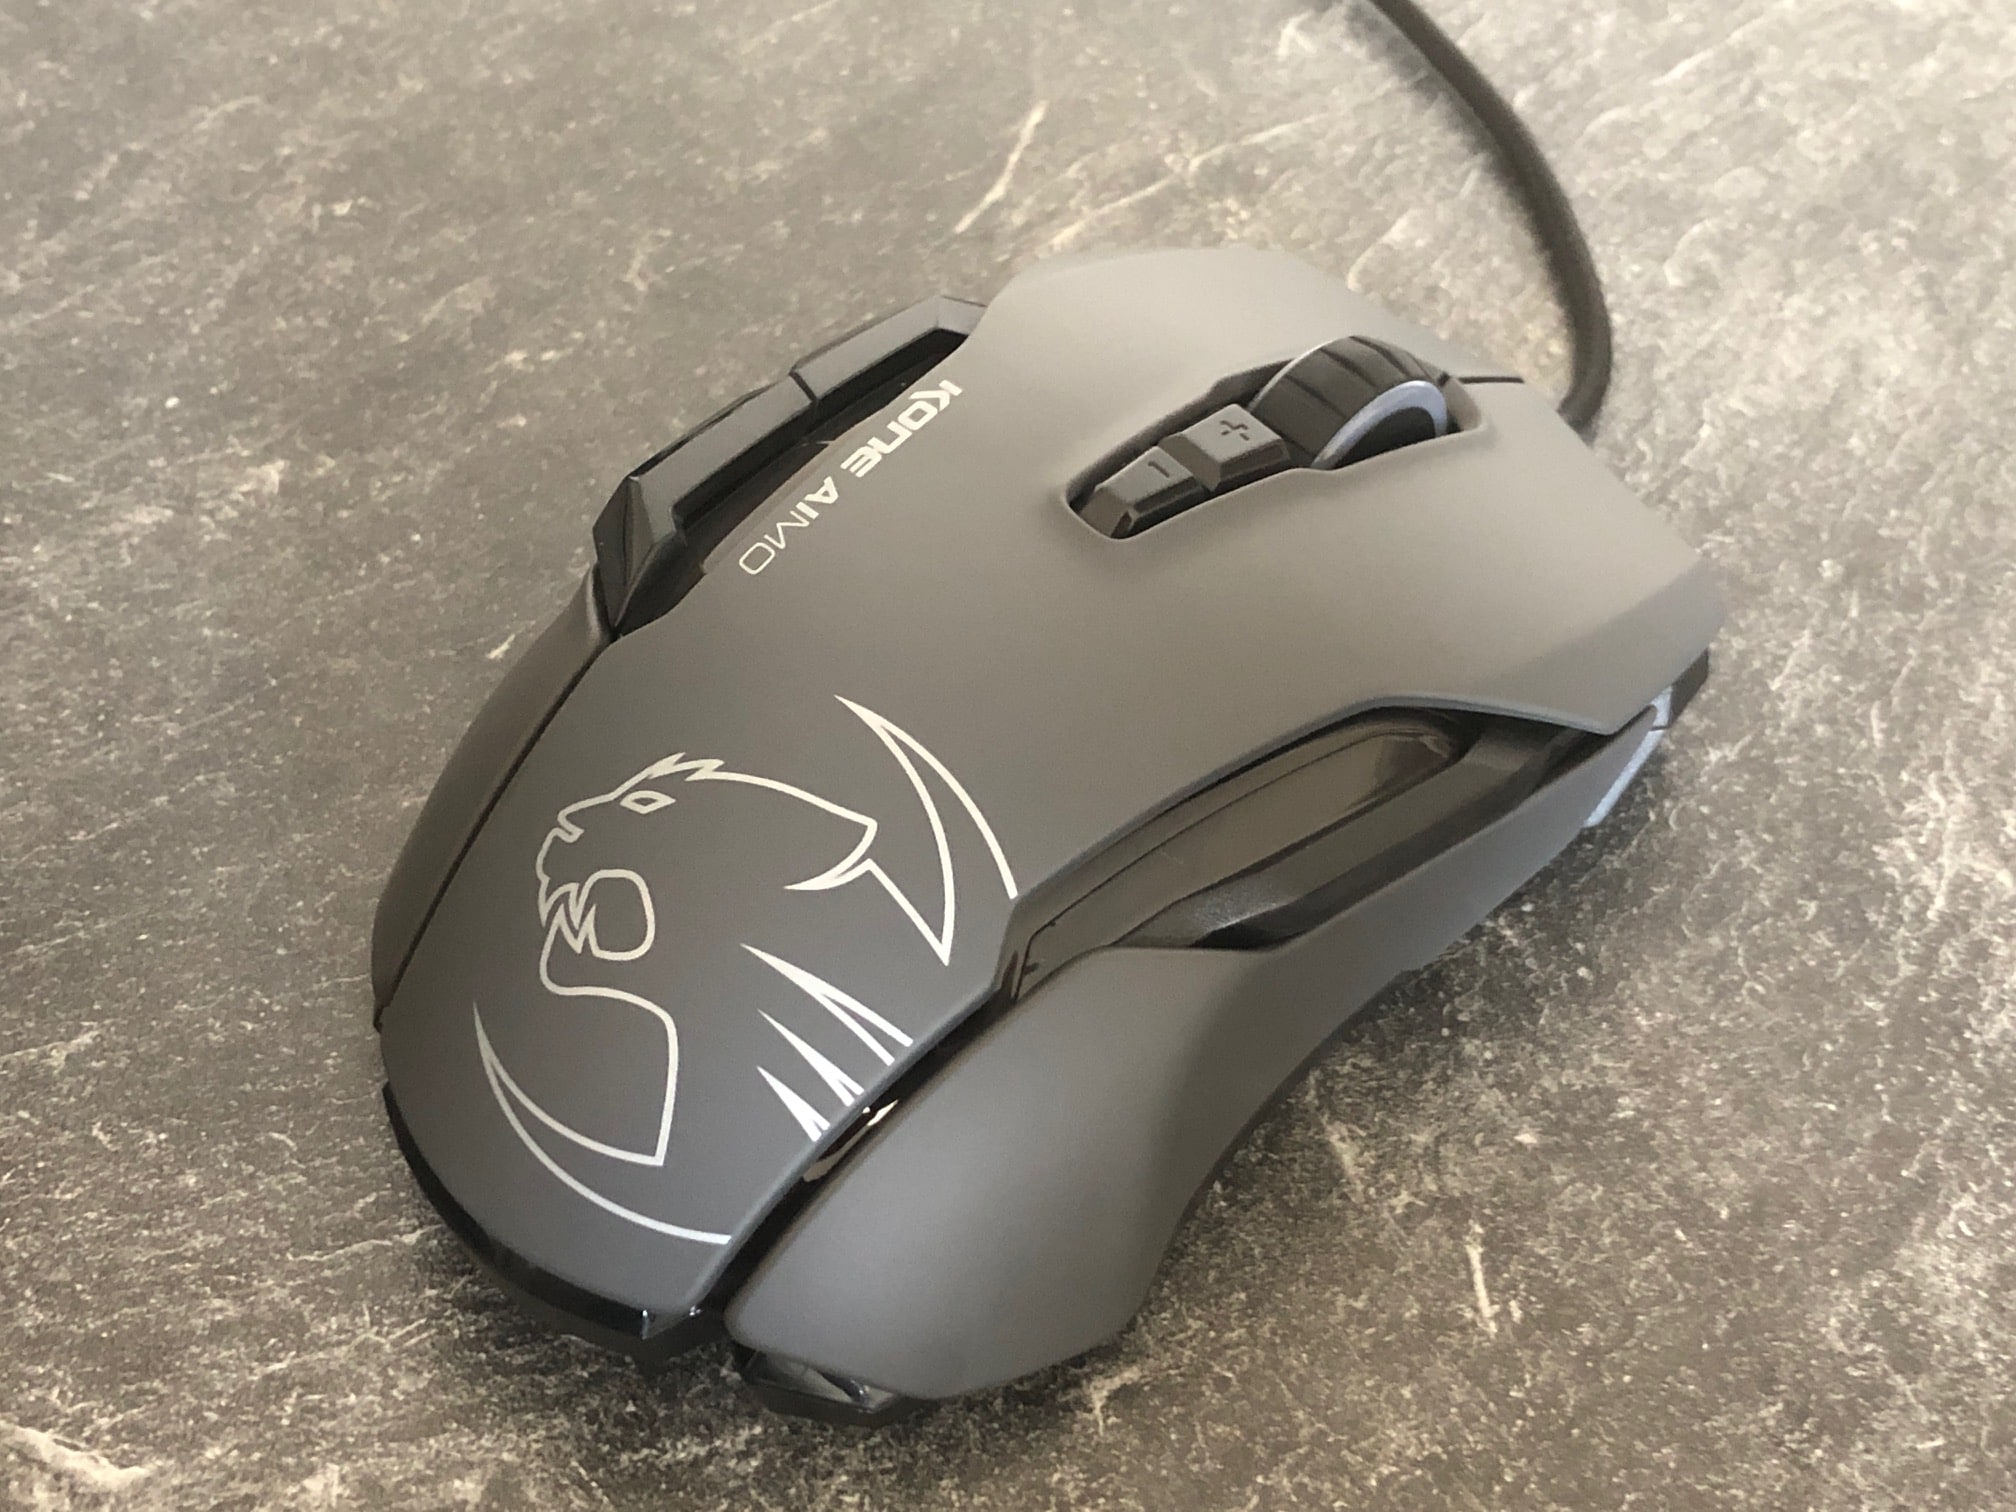 Roccat Kone Aimo Gaming Mouse Review